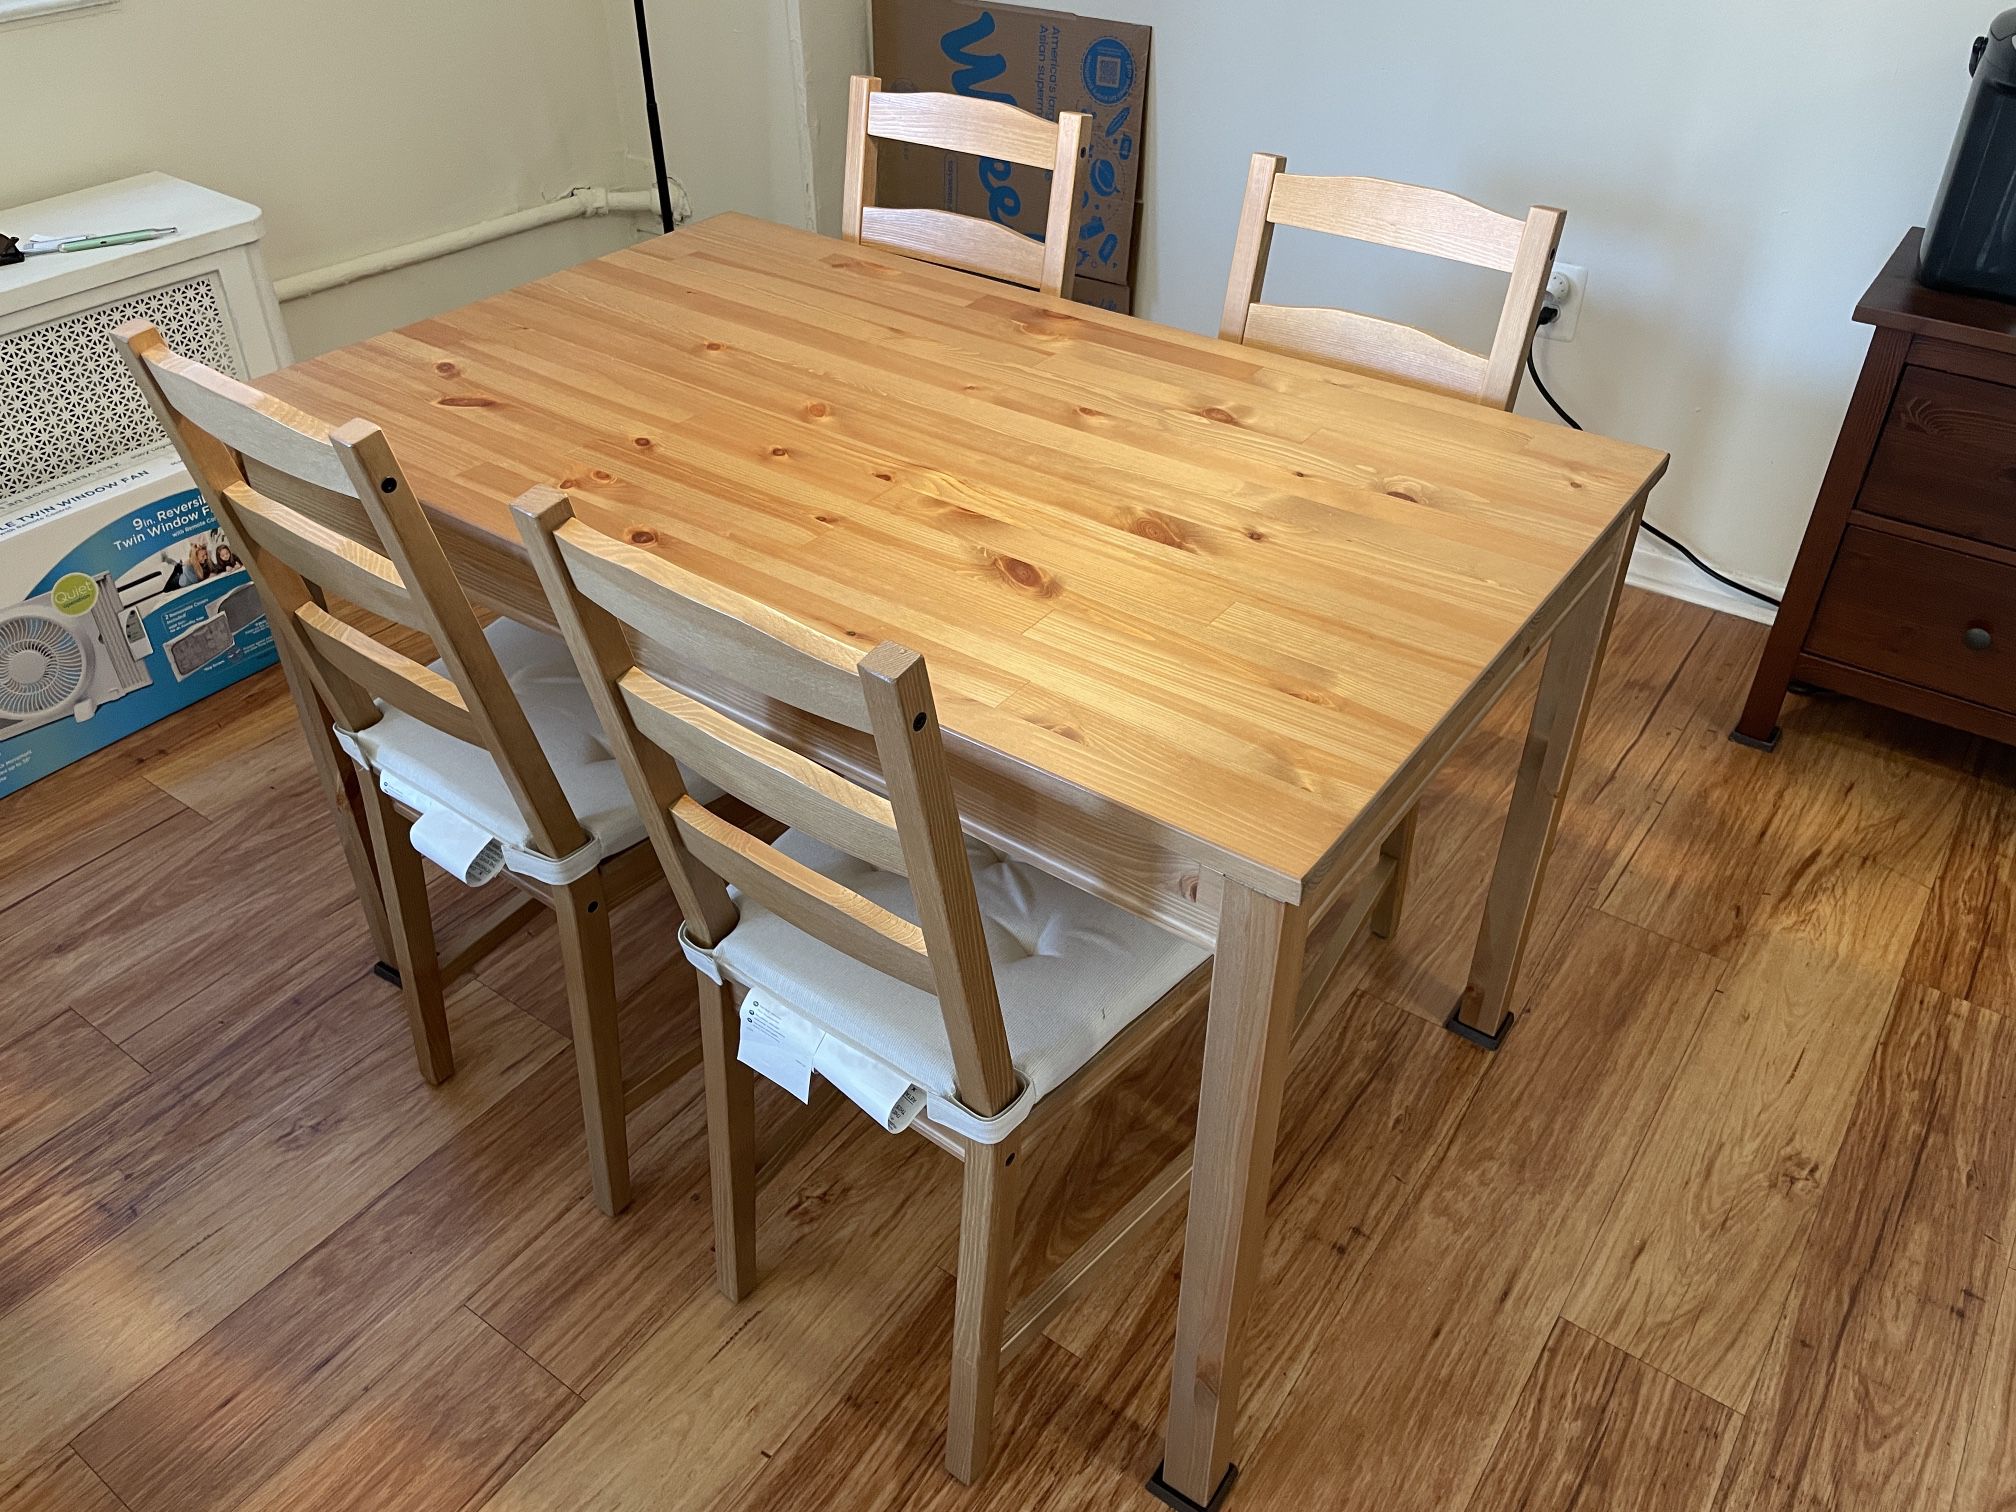 Dining Table Set With 4 Chairs With Cushions